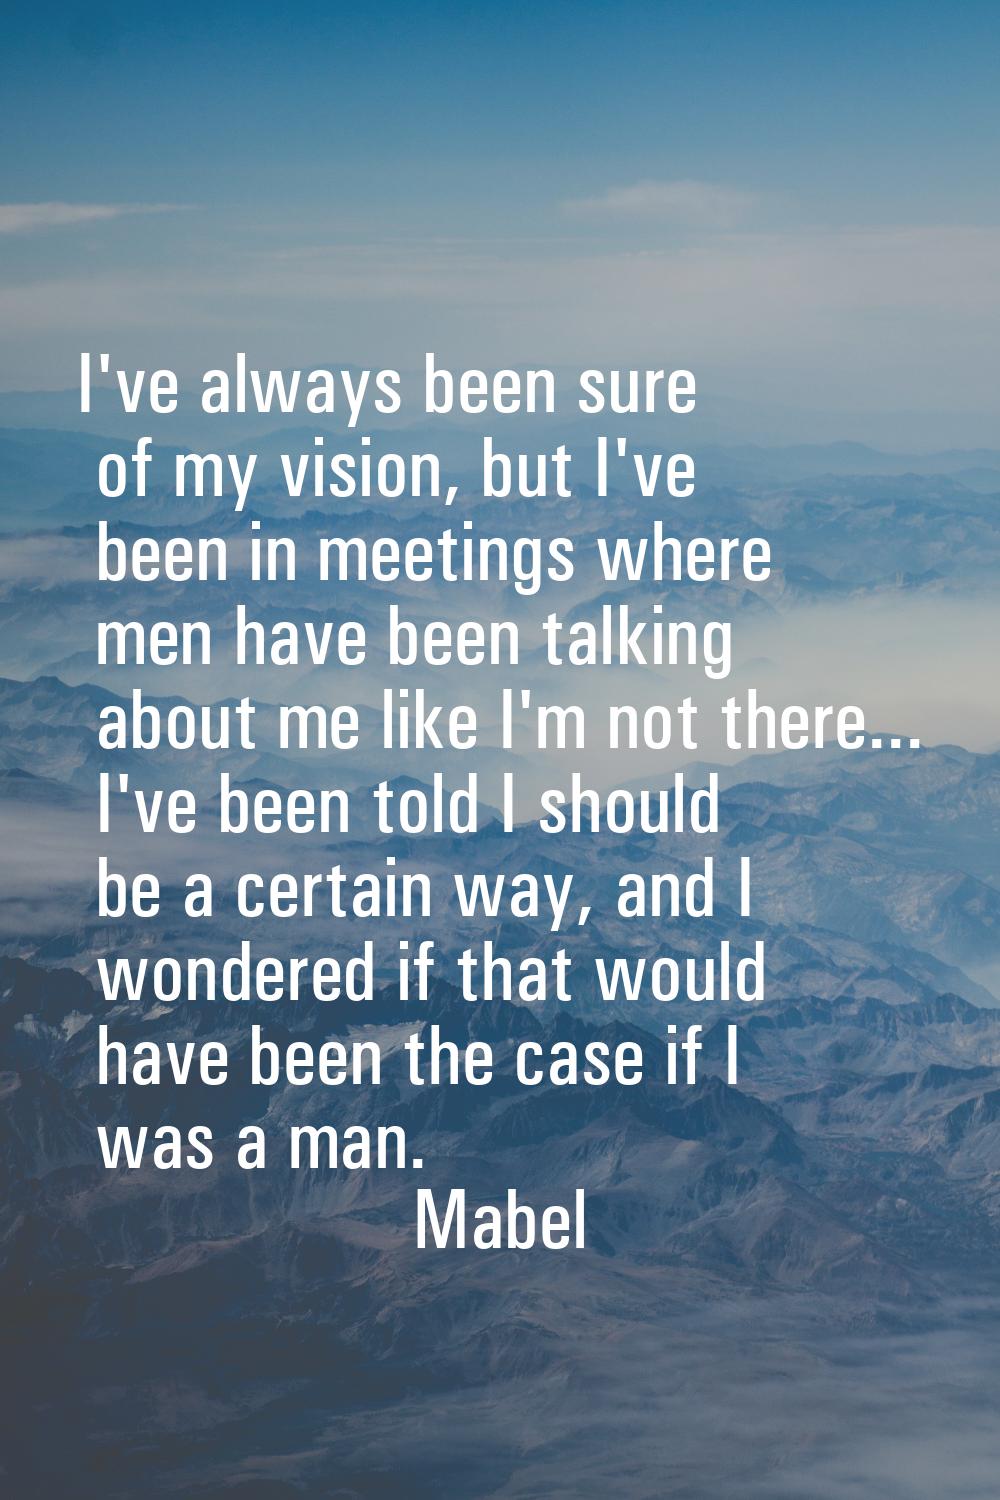 I've always been sure of my vision, but I've been in meetings where men have been talking about me 